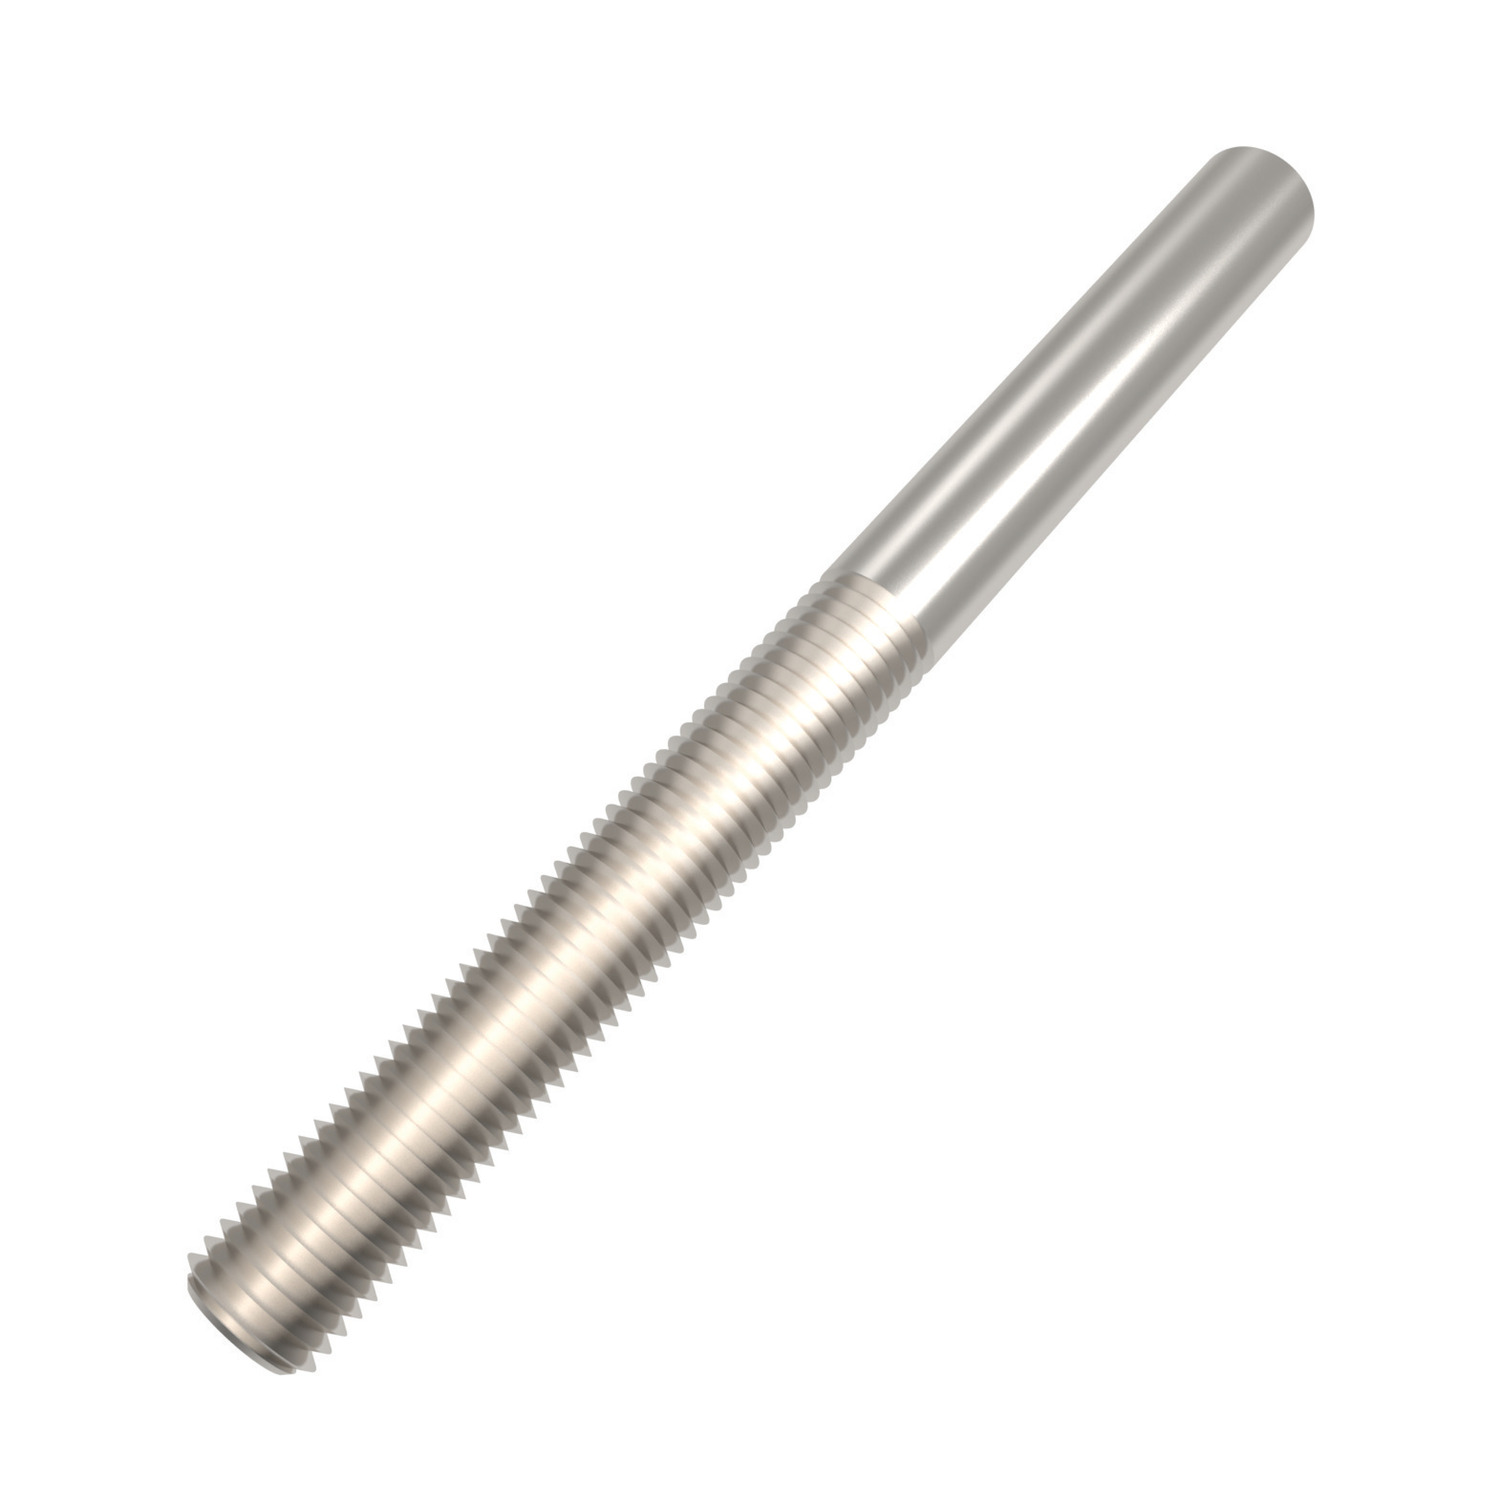 R3868.R030-A4 Welding Studs RH M30 A4 s/s Not to be used for lifting unless SWL marked.